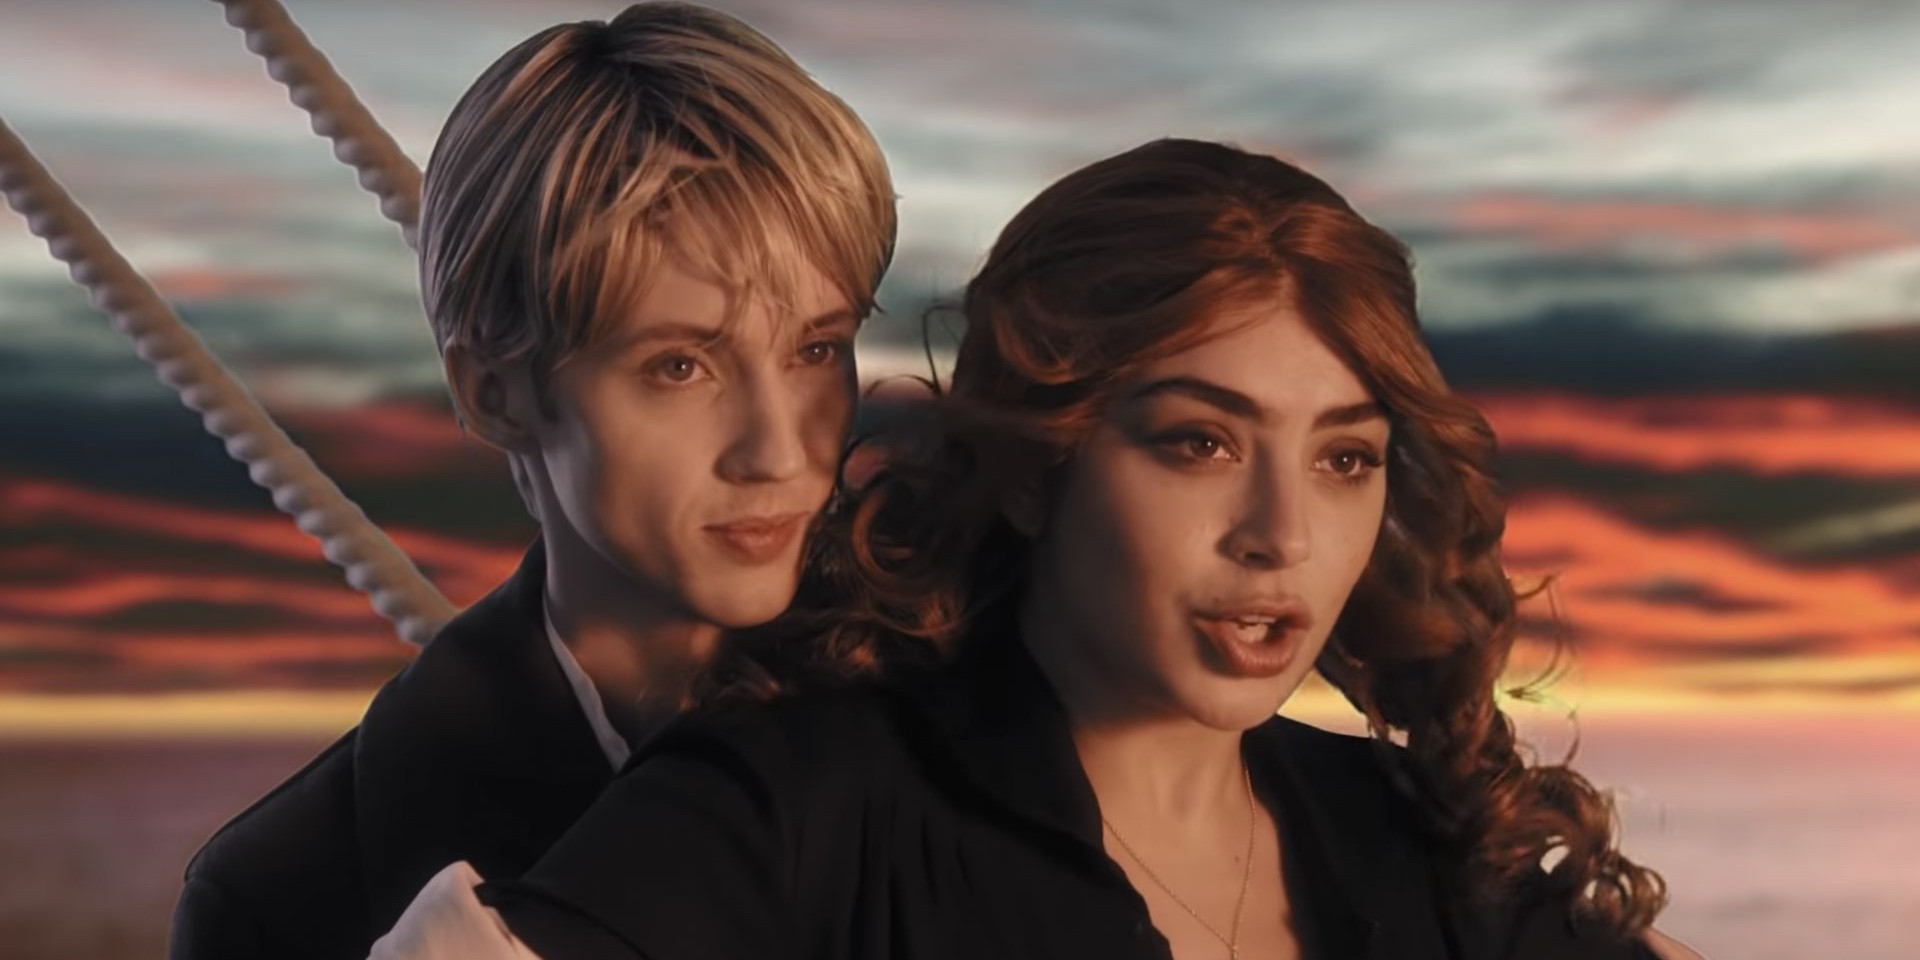 Charli XCX and Troye Sivan bring back the '90s in music video for '1999' – watch